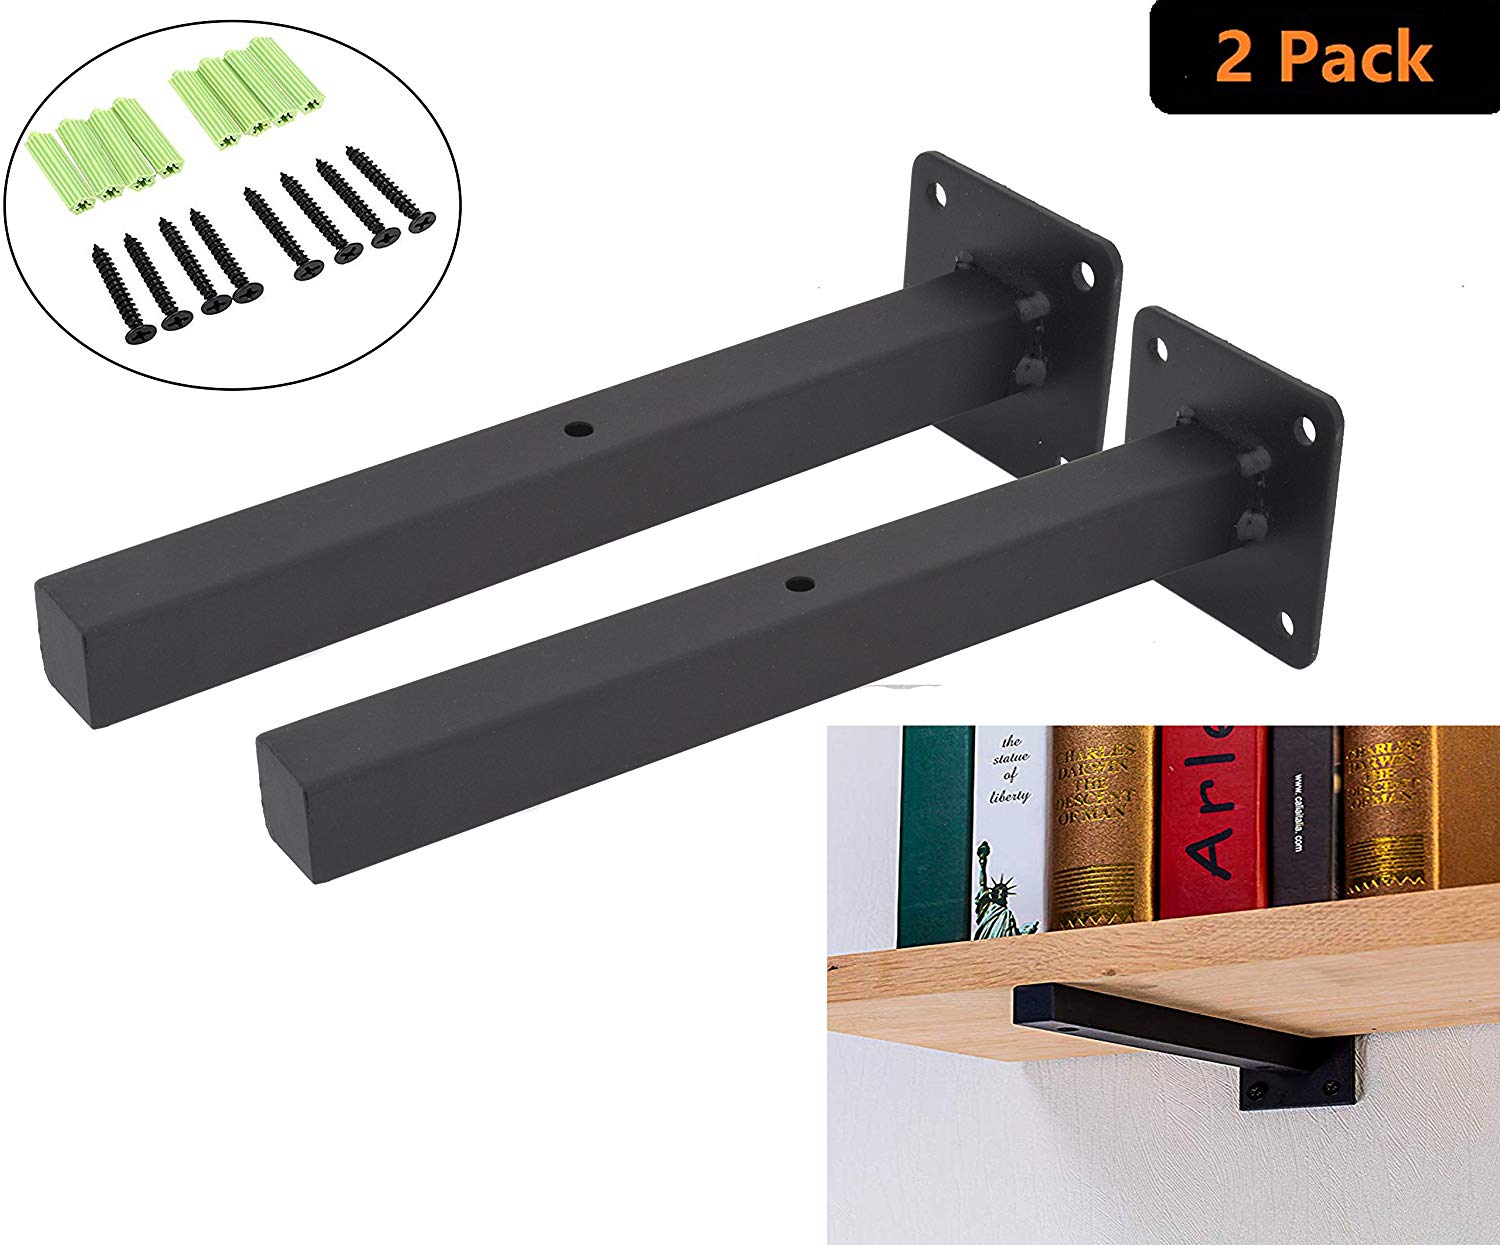 industrial black floating shelf brackets retro wall shelves without mounted supports includes screws anchors square inch addgrace home metal rods for shelving perspex deep unit